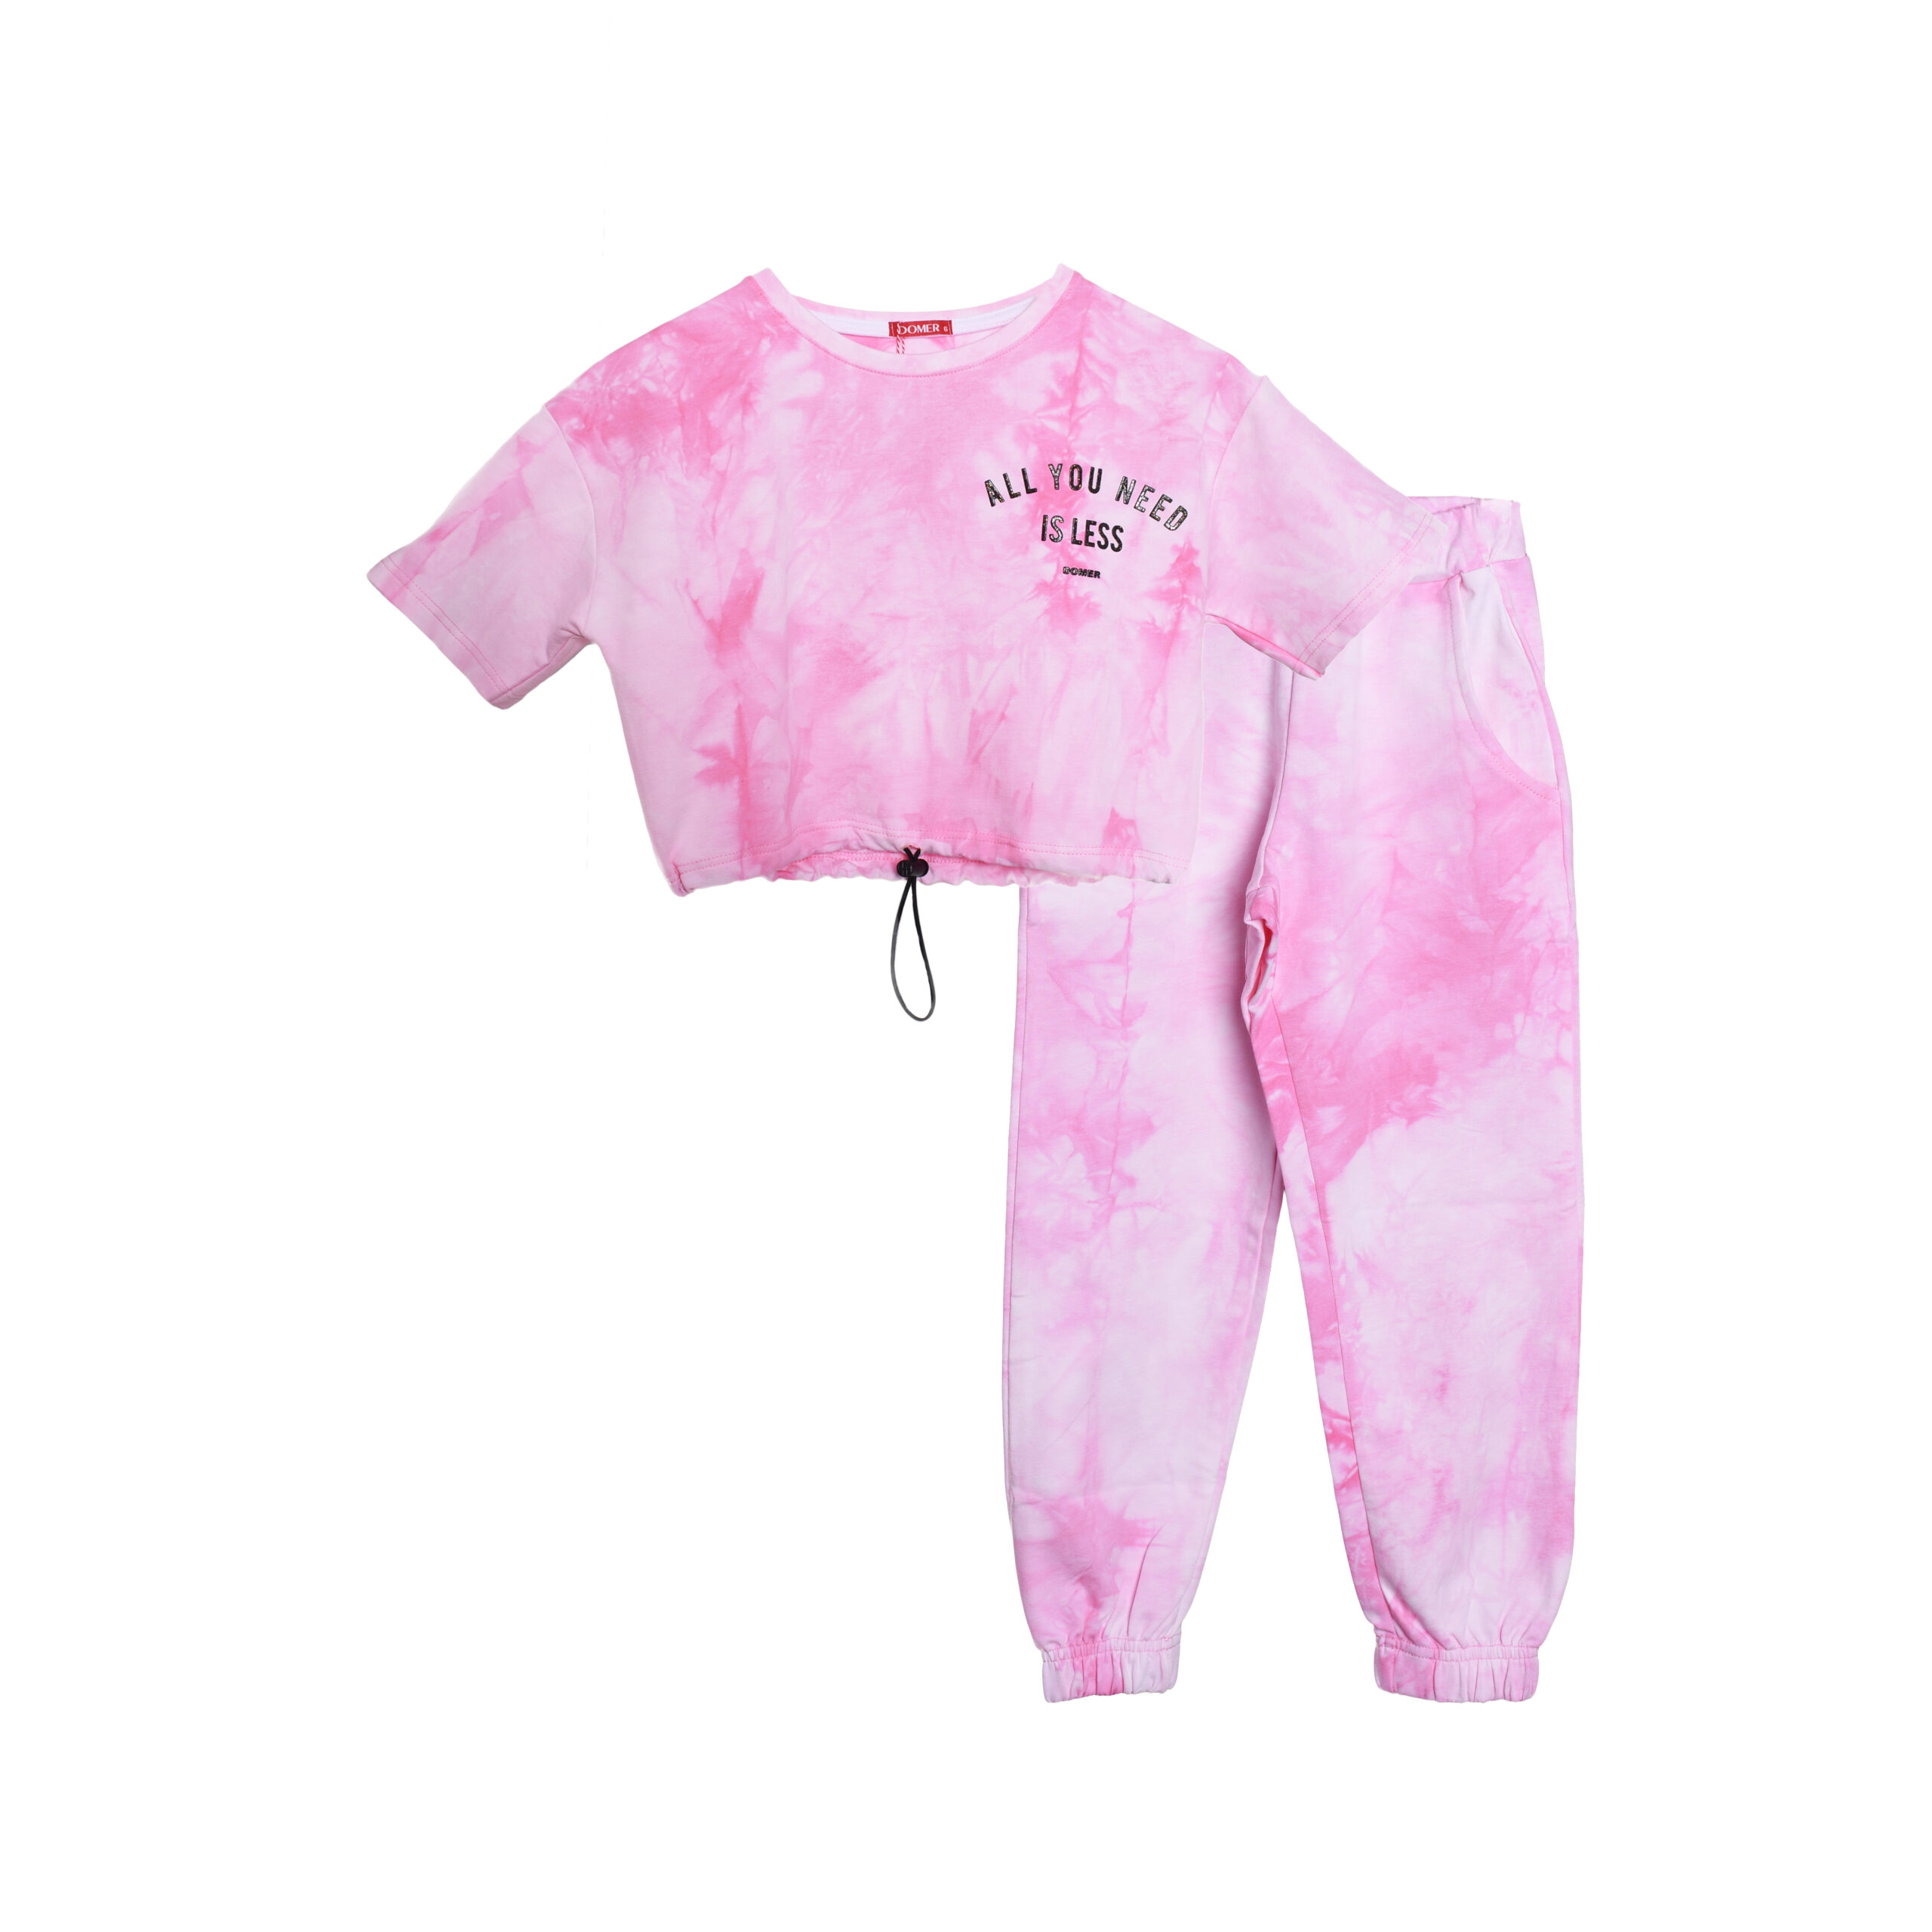 conversation reform Soak Tie dye form in pink, purple chocolate shades for girls 6 - 16 years old.